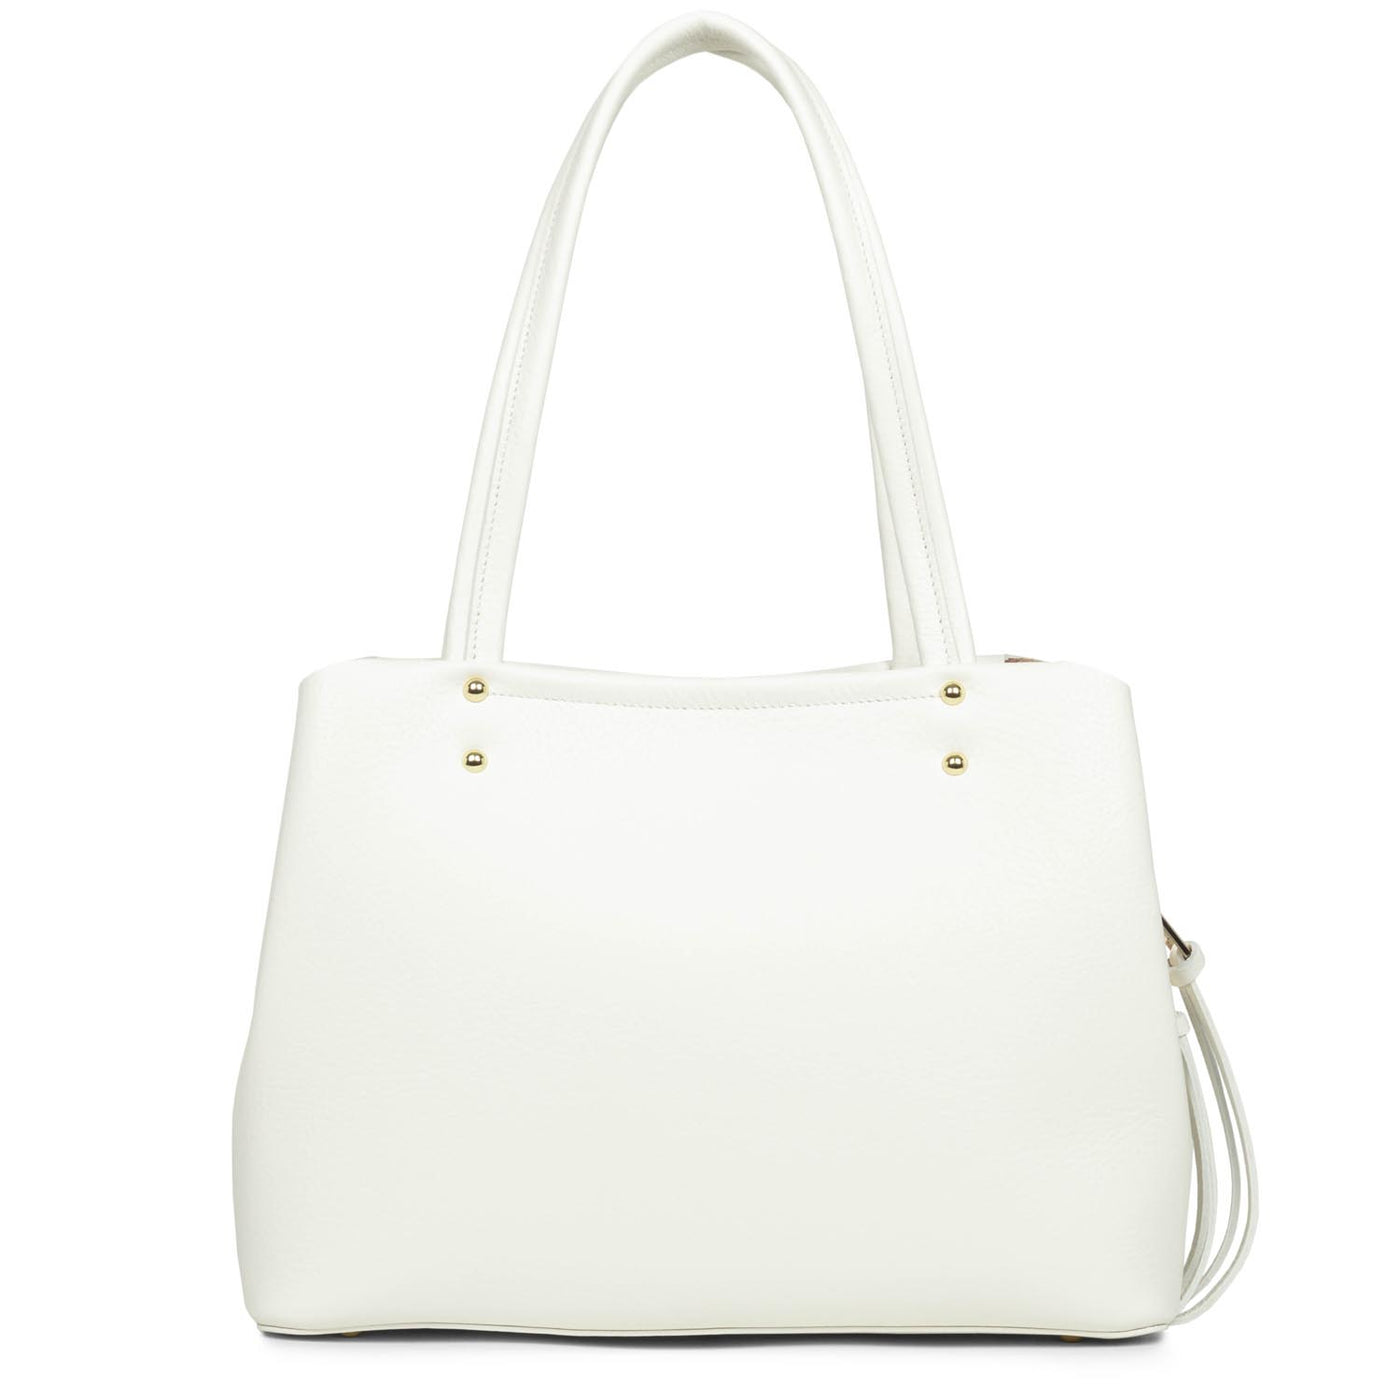 m tote bag - foulonné double #couleur_blanc-cass-in-nude